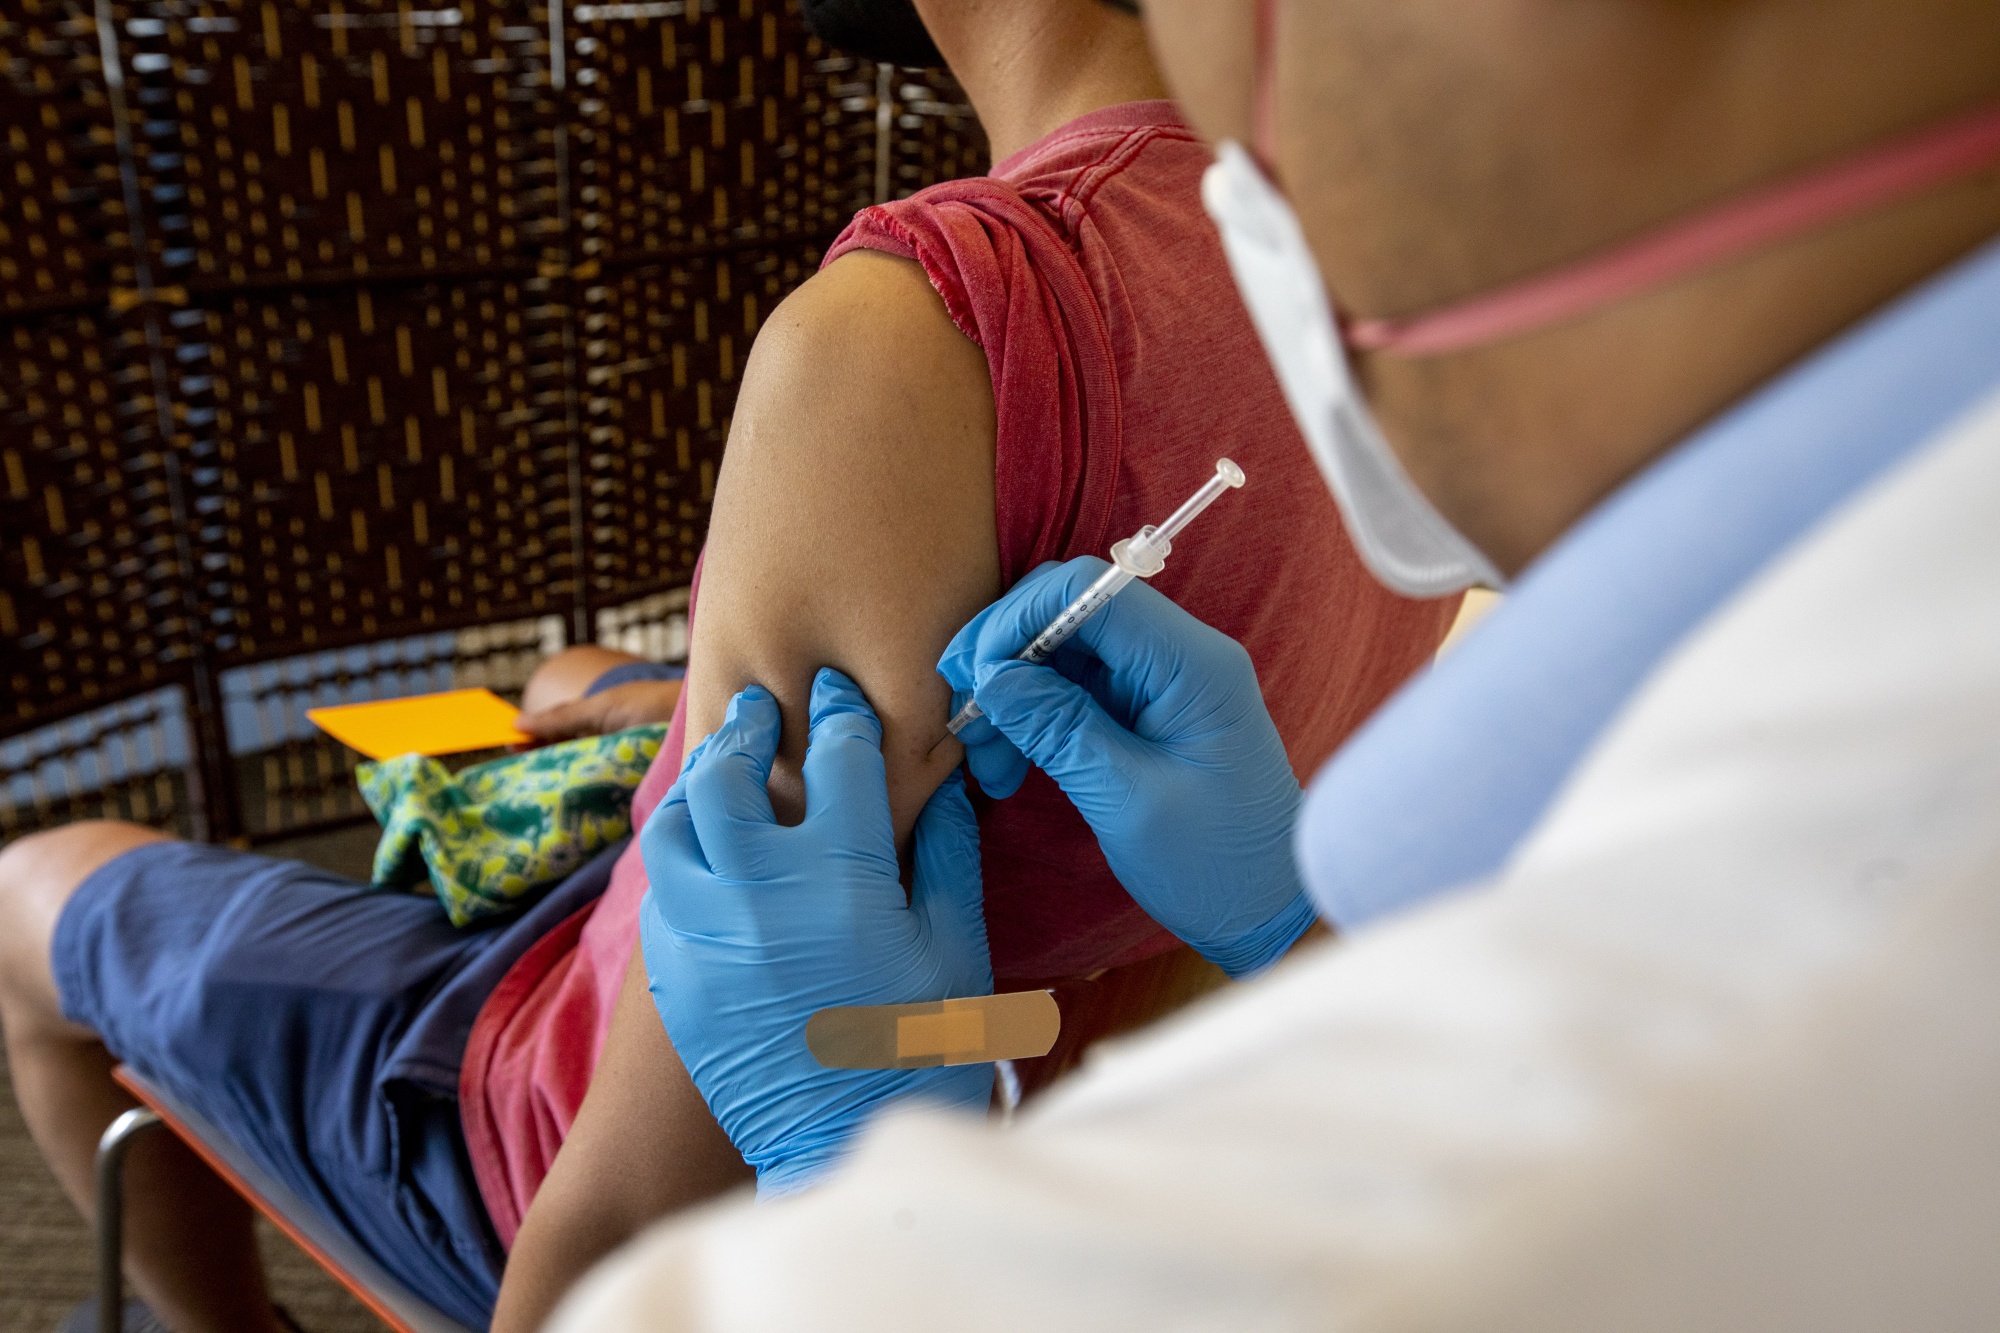 A health worker administers a dose of the Bavarian Nordic A/S Jynneos monkeypox vaccine at a vaccination site in&nbsp;California, US, on Wednesday, Aug. 3, 2022.&nbsp;